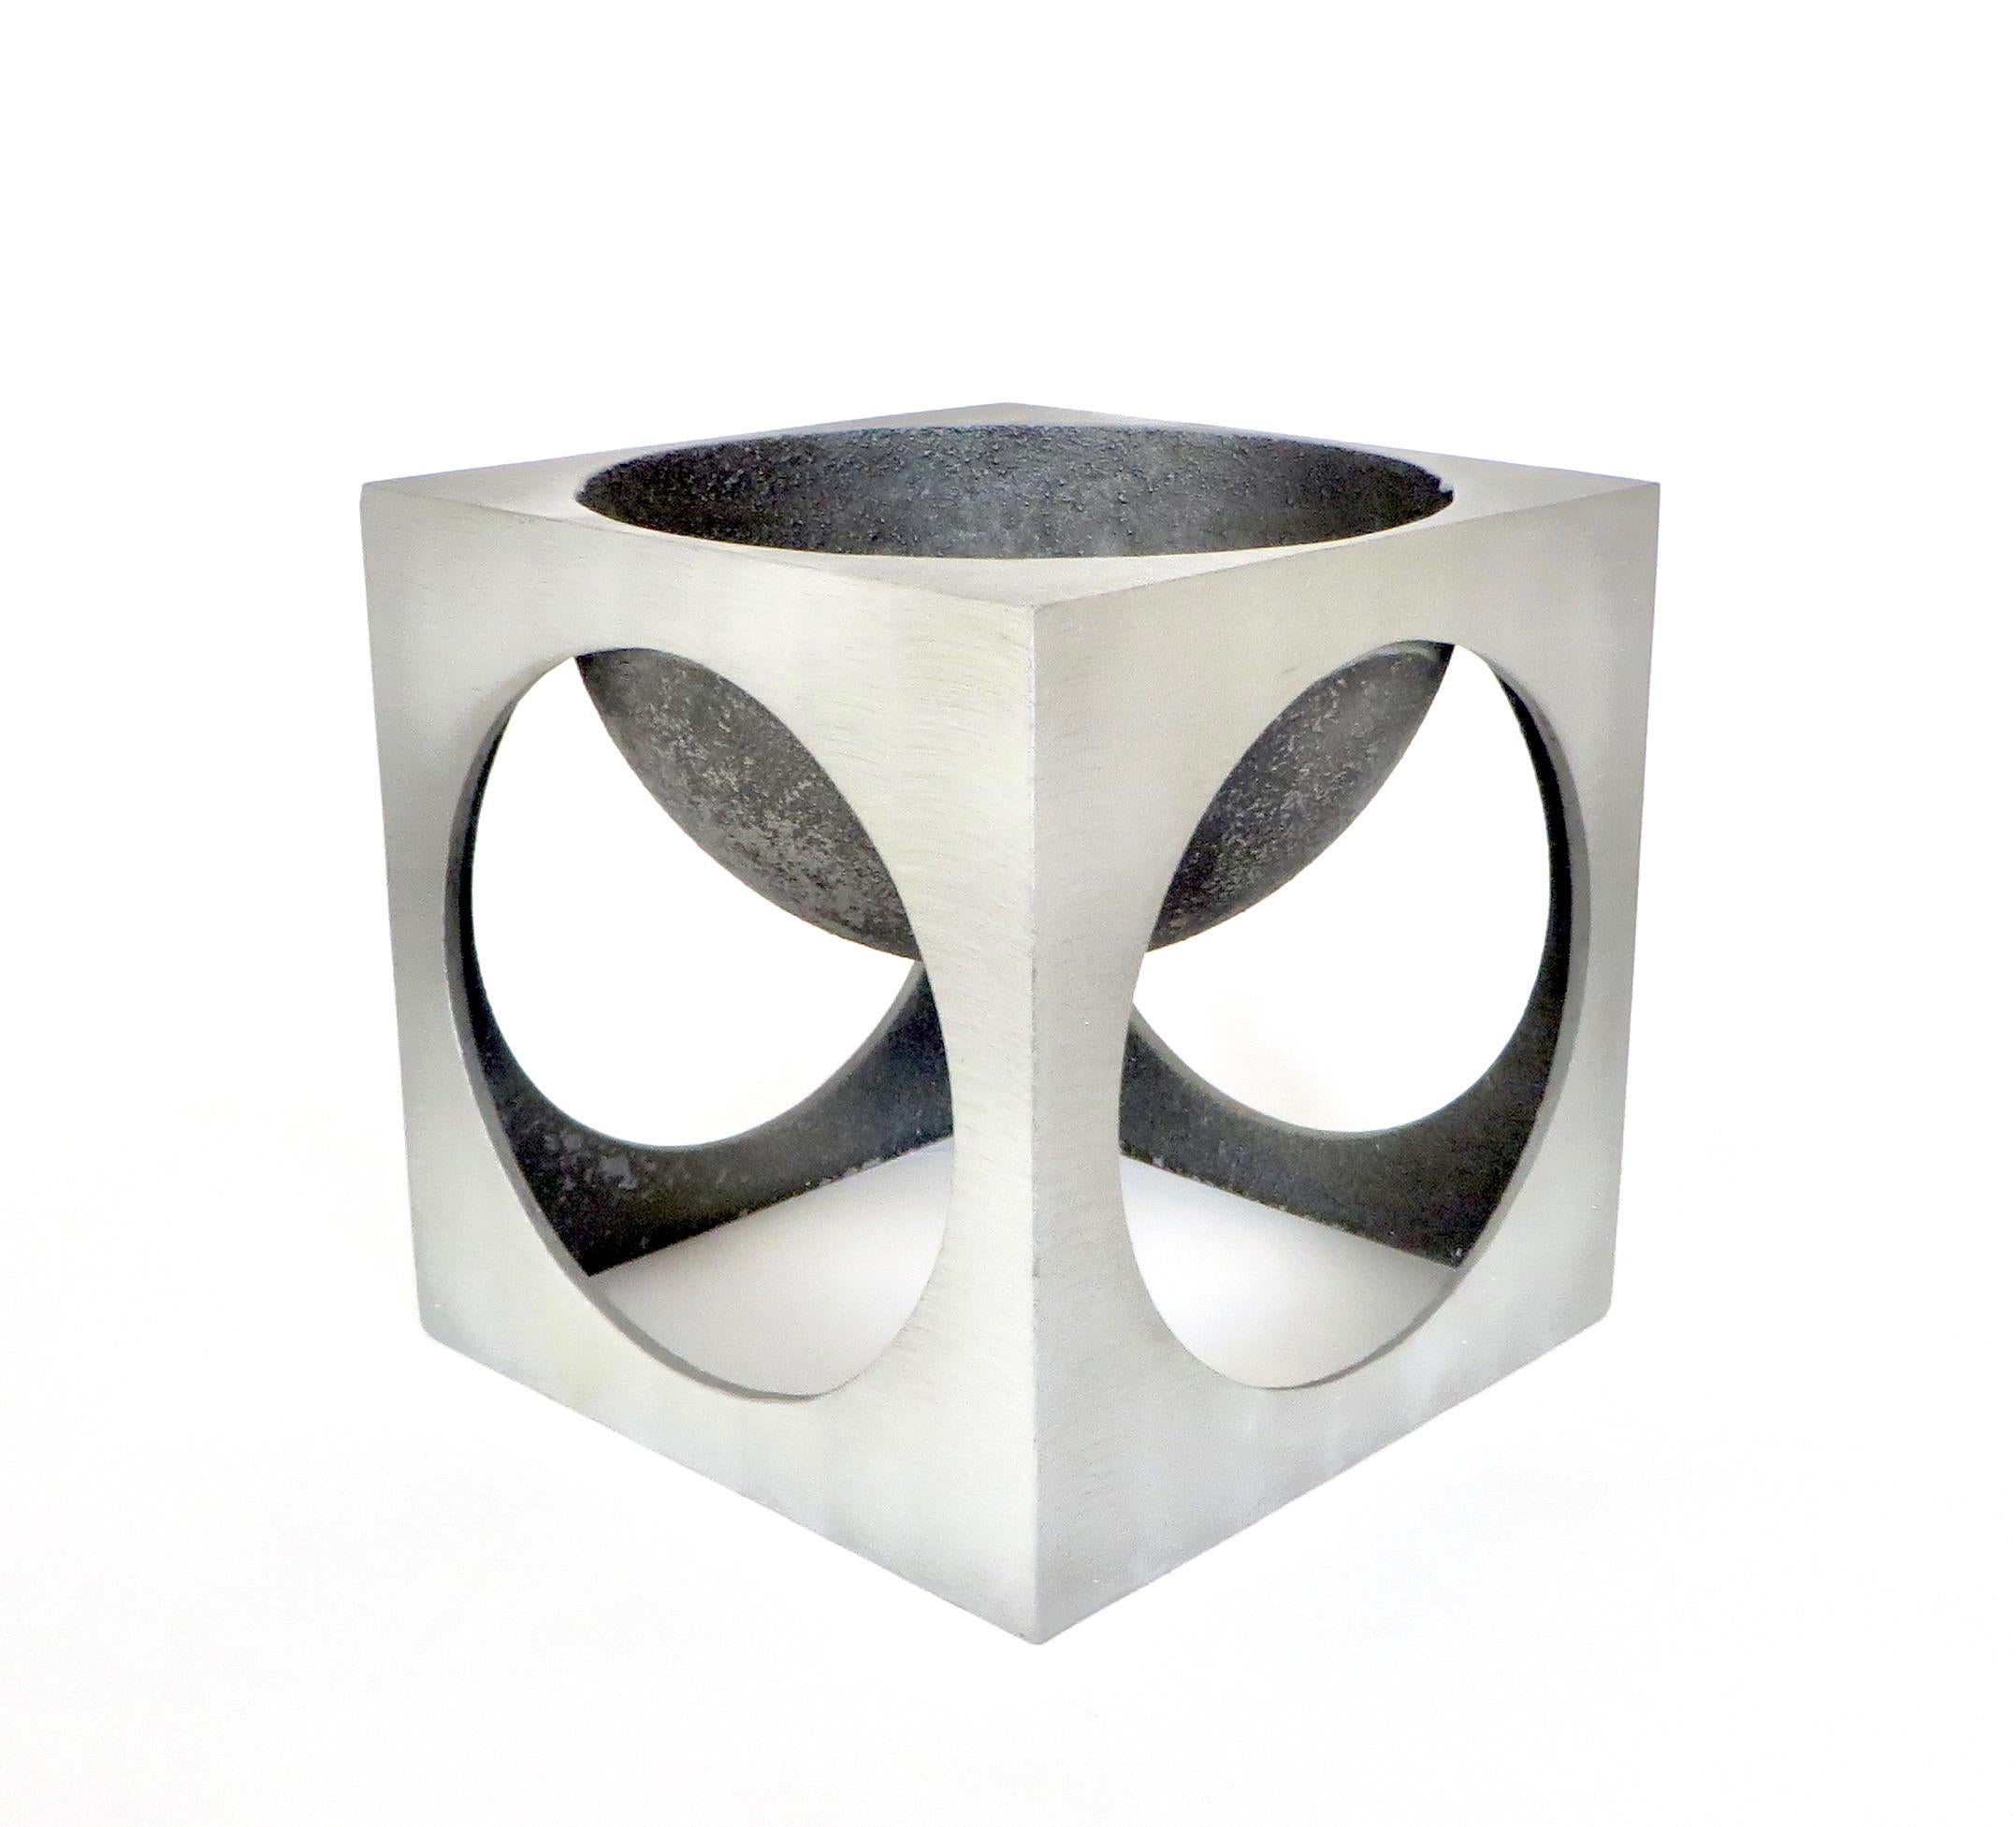 Lorenzo Burchiellaro cast and etched aluminum square sculpture.
Patinaed black and natural etched aluminum composes this open cube with a dish depressed center for either holding various things of your choosing or displaying as pure